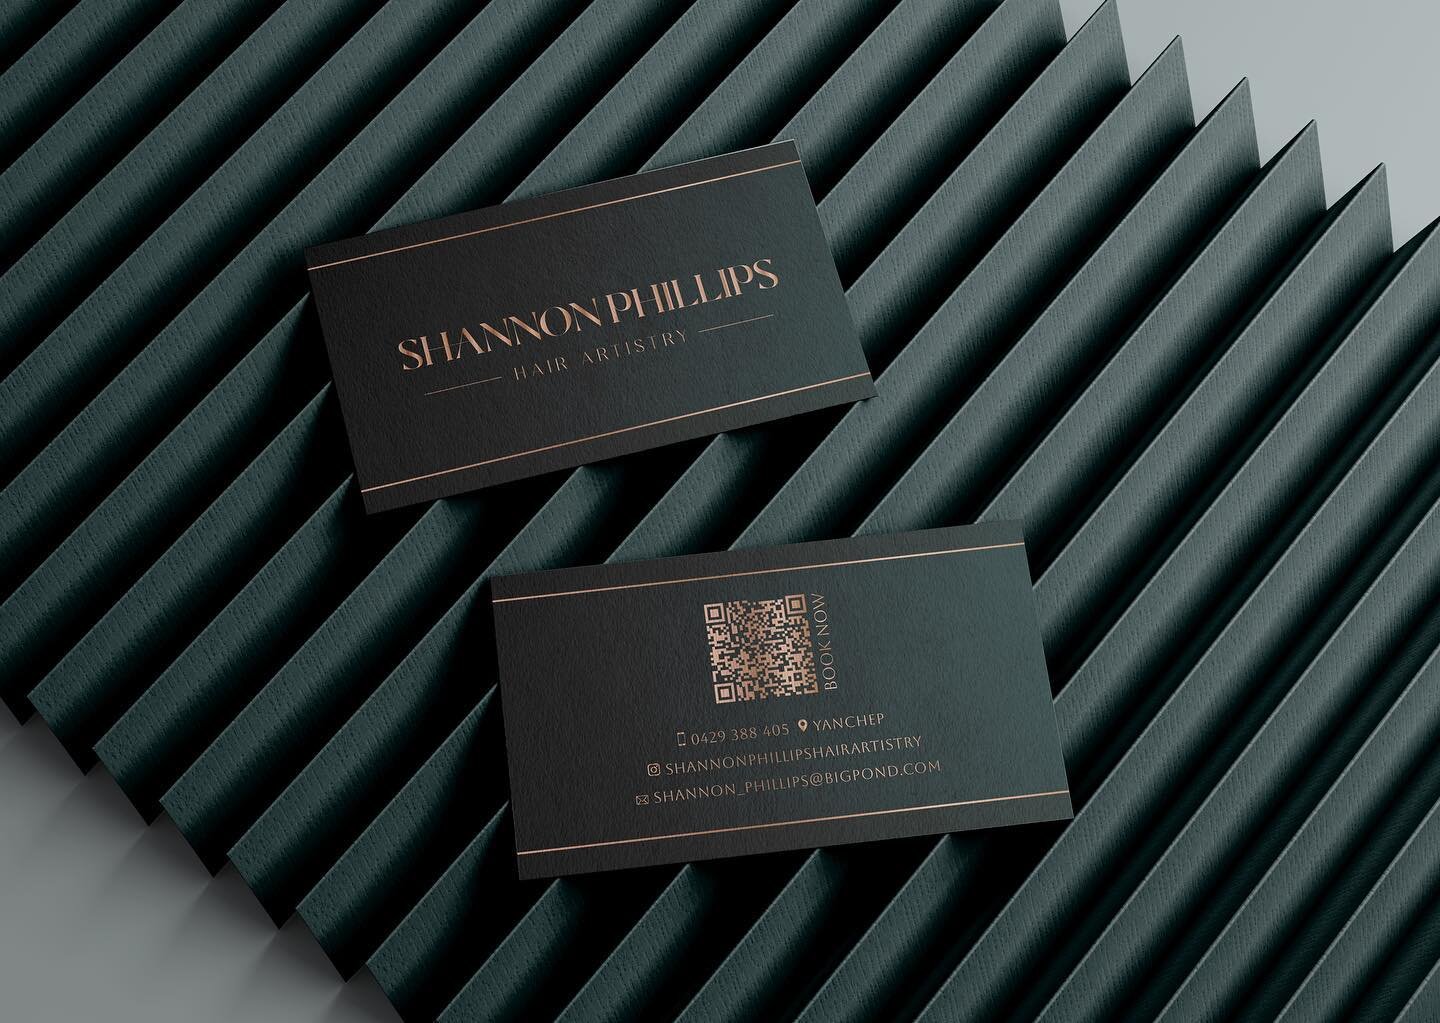 Business cards created for @shannonphillipshairartistry 🖤 

A well designed business card doesn&rsquo;t just tell people your name and contact info, it helps people understand who you are and what your style is. 

If your business cards stand out I&